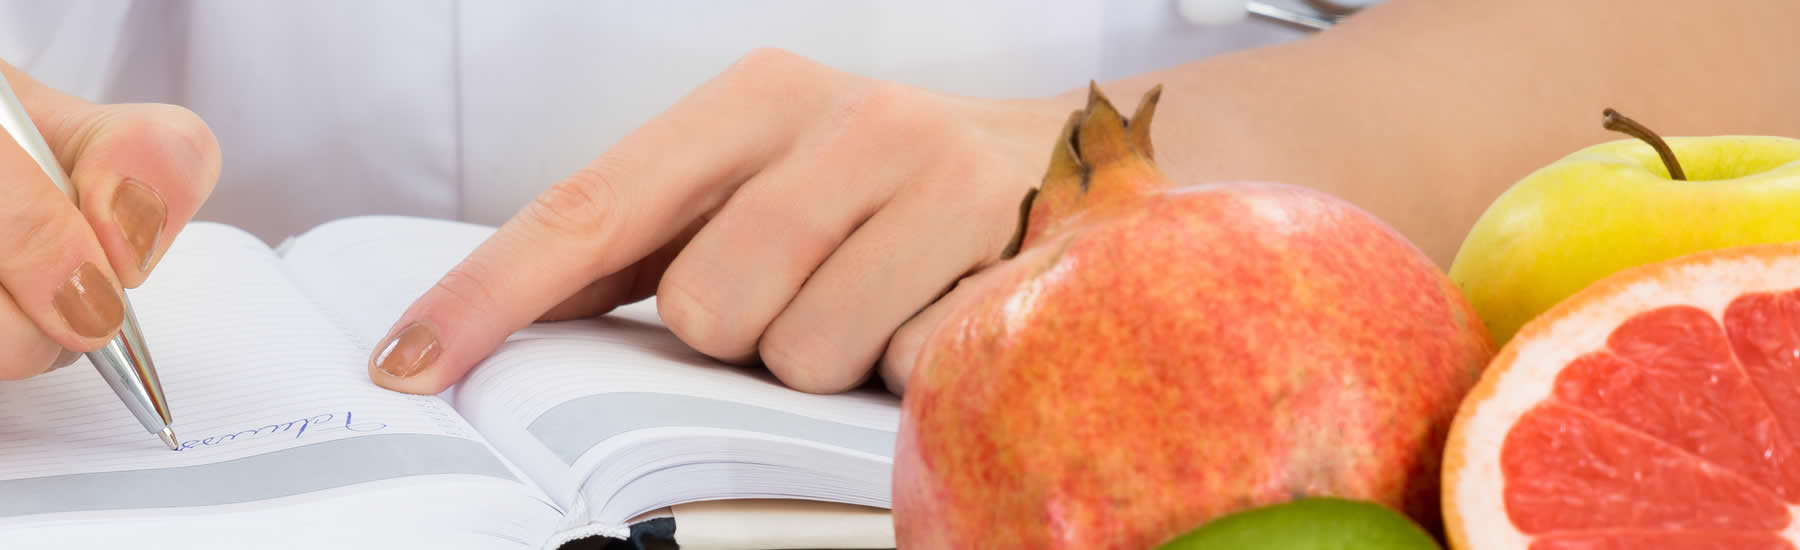 Learn about disease management and prevention dietitian management services are offered.